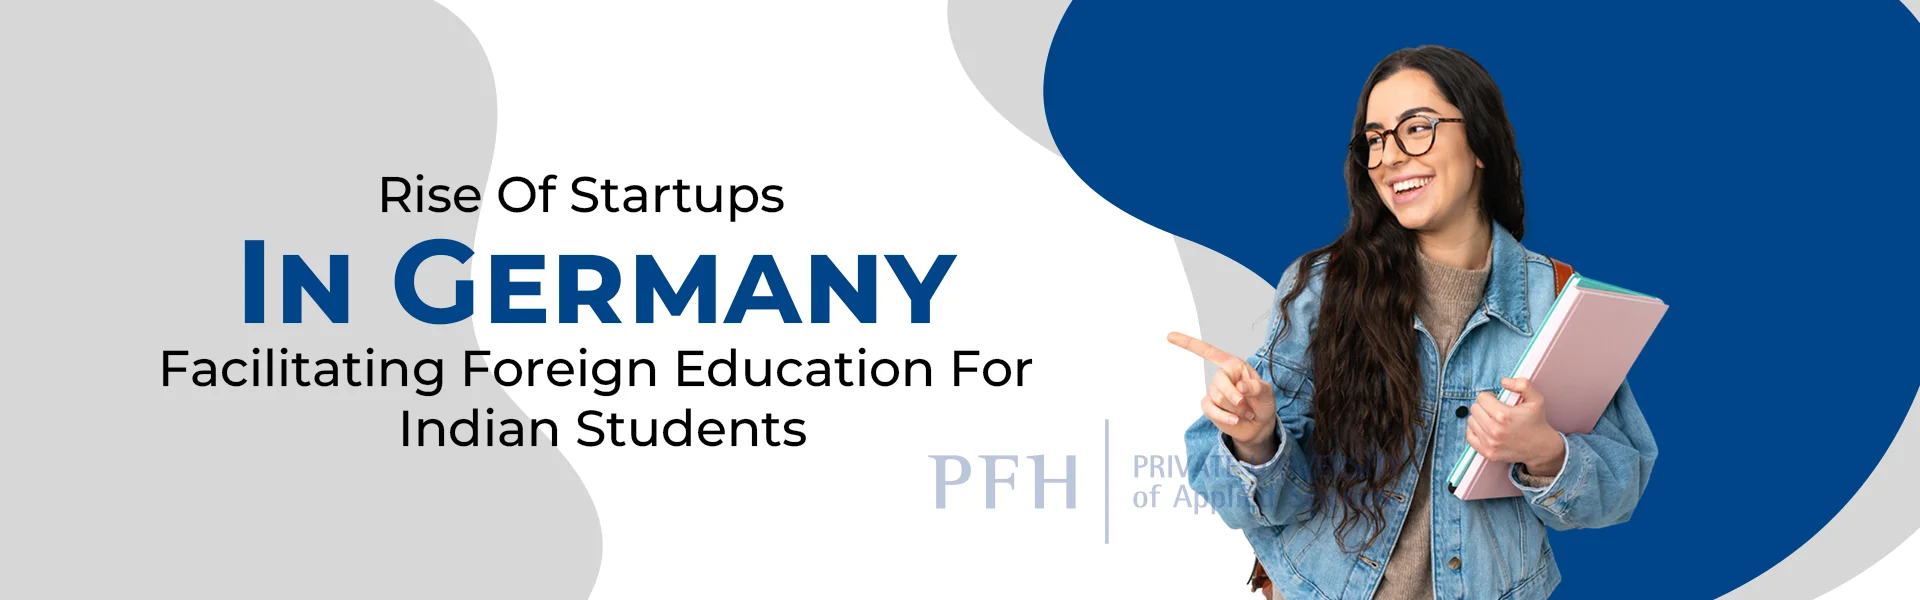 Rise Of Startups In Germany Facilitating Foreign Education For Indian Students